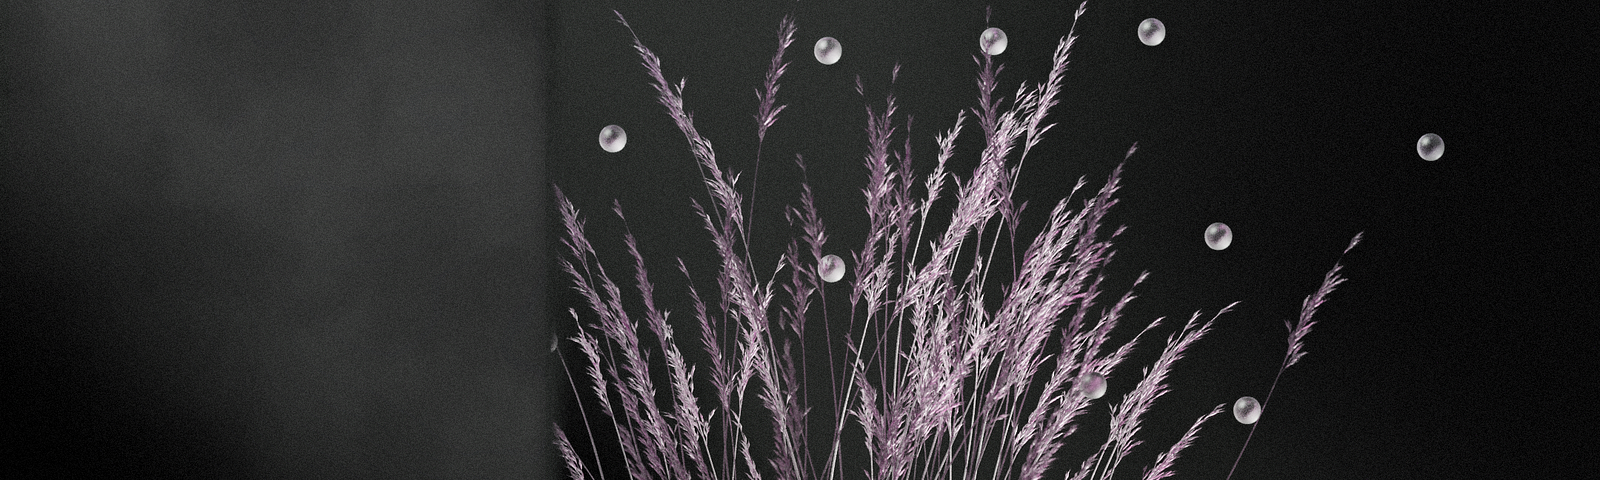 In a dark gray room, decorative grass with beads sits behind a purple glass ball.